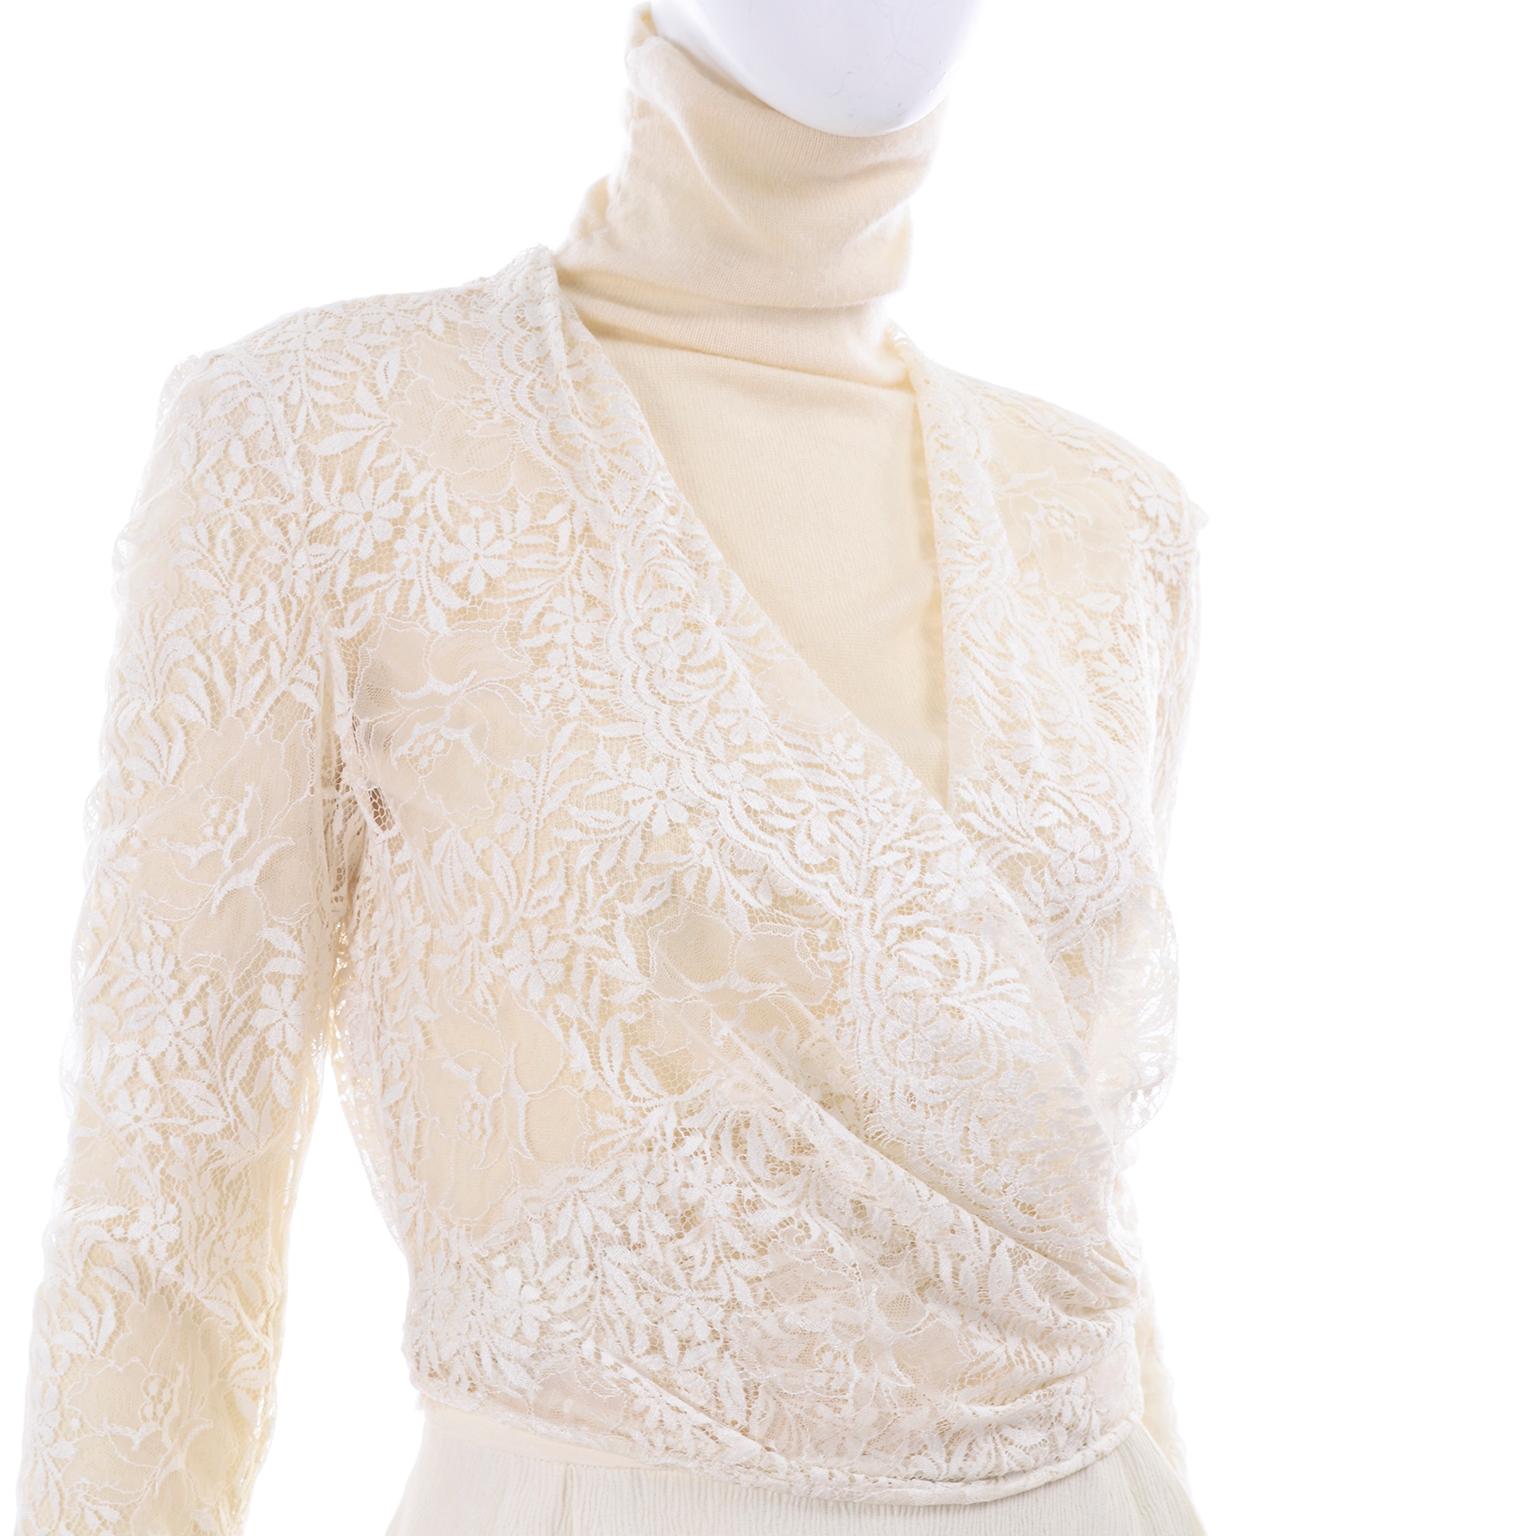 Valentino Cream Cashmere Sweater Ivory Lace Wrap Top & Textured High Waist Pants 3